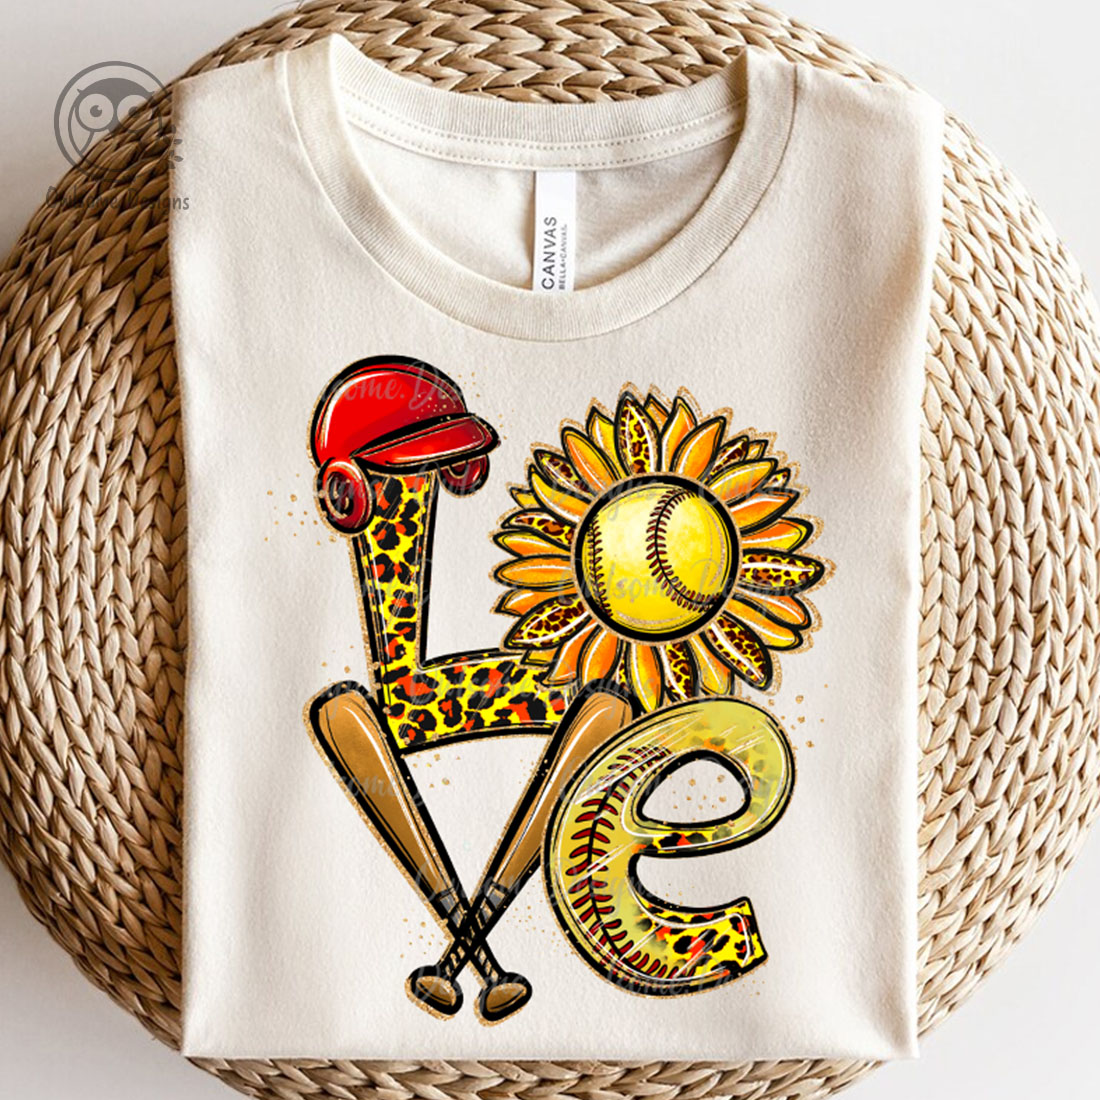 Image of a T-shirt with an exquisite inscription Love with softball elements.